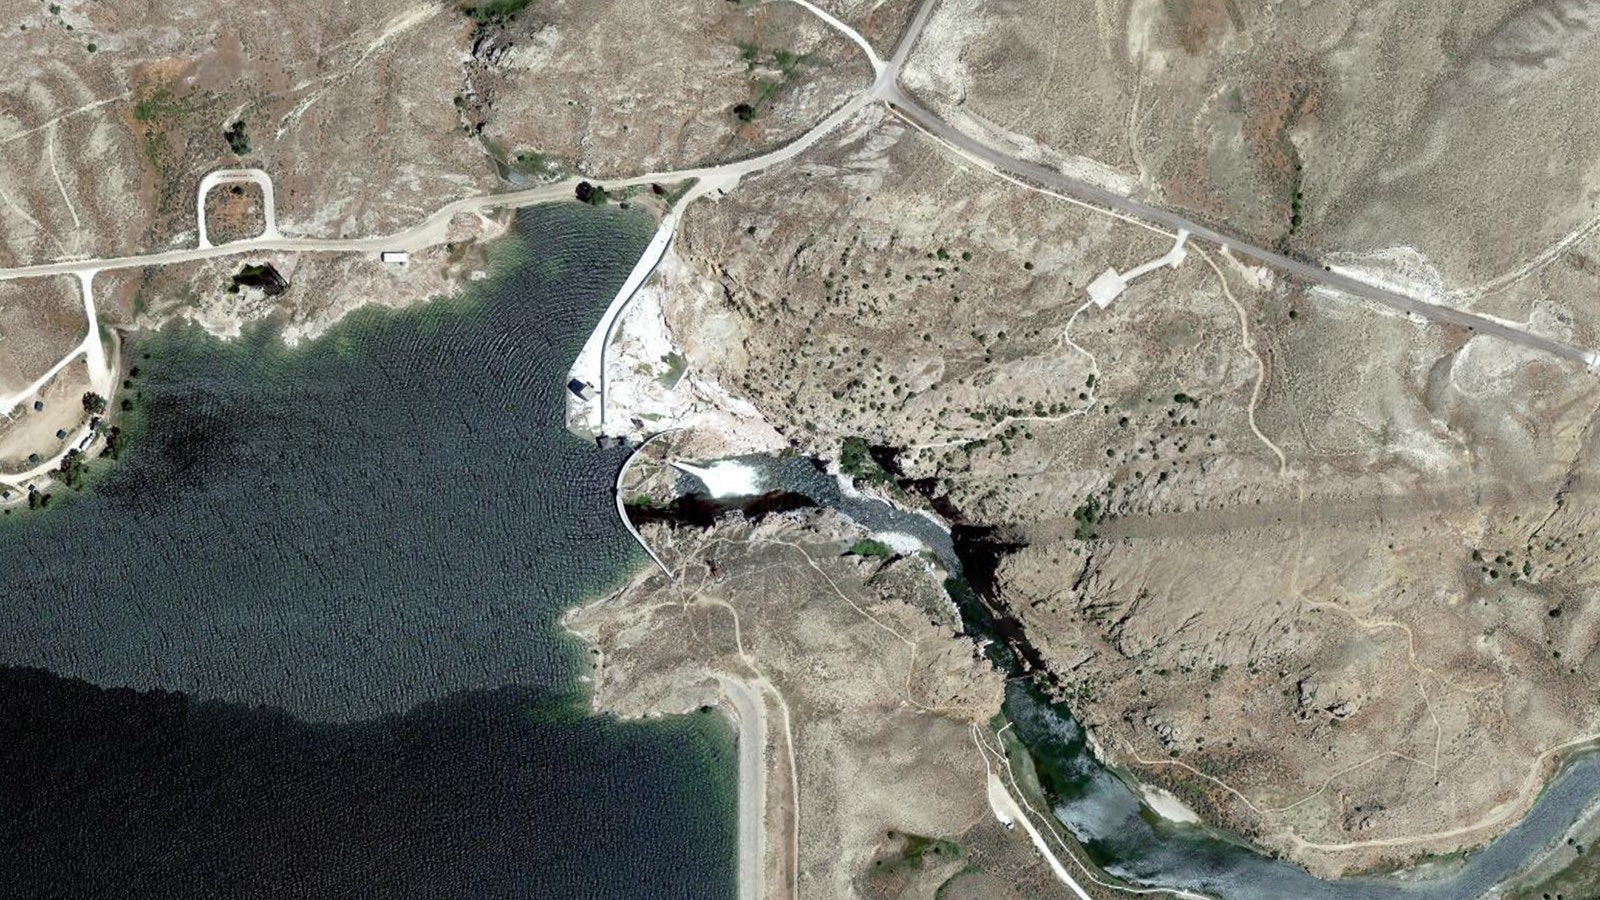 The Pathfinder Reservoir and dam provided the first step in the irrigation system for the North Platte Project run by the Bureau of Reclamation.